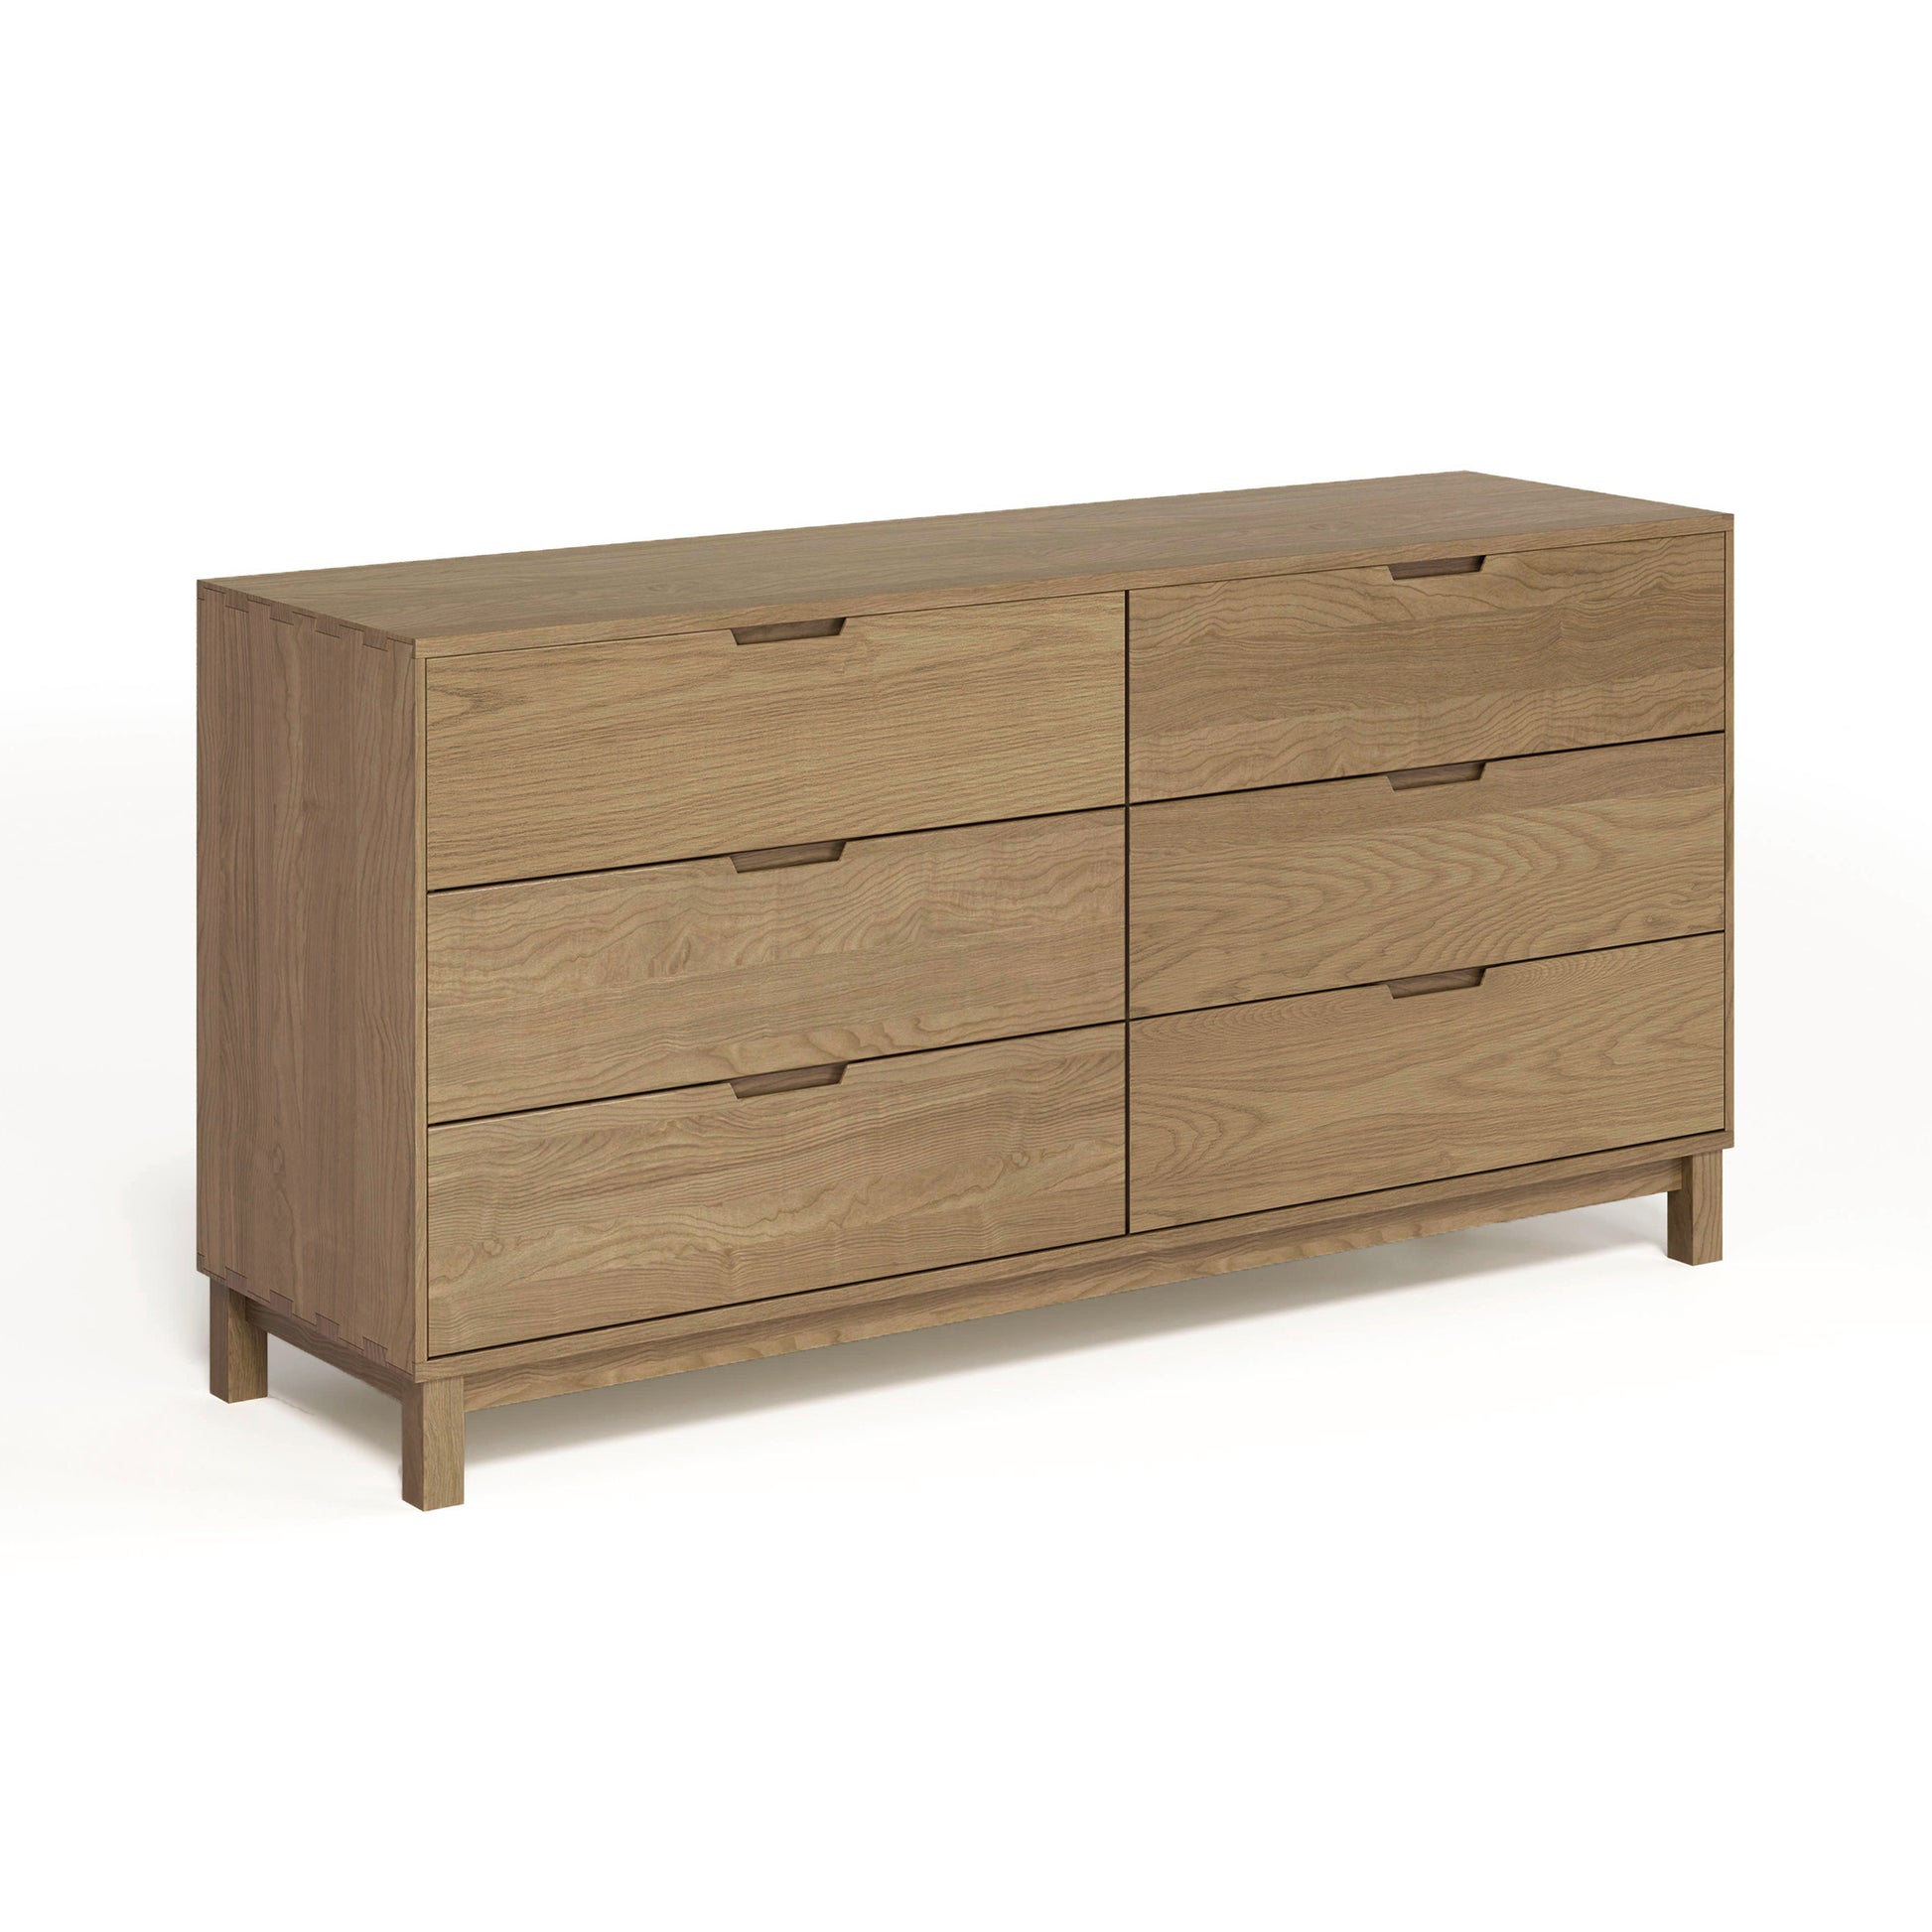 A solid oak hardwood six-drawer dresser, known as the Copeland Furniture Oslo 6-Drawer Dresser, on a plain background.